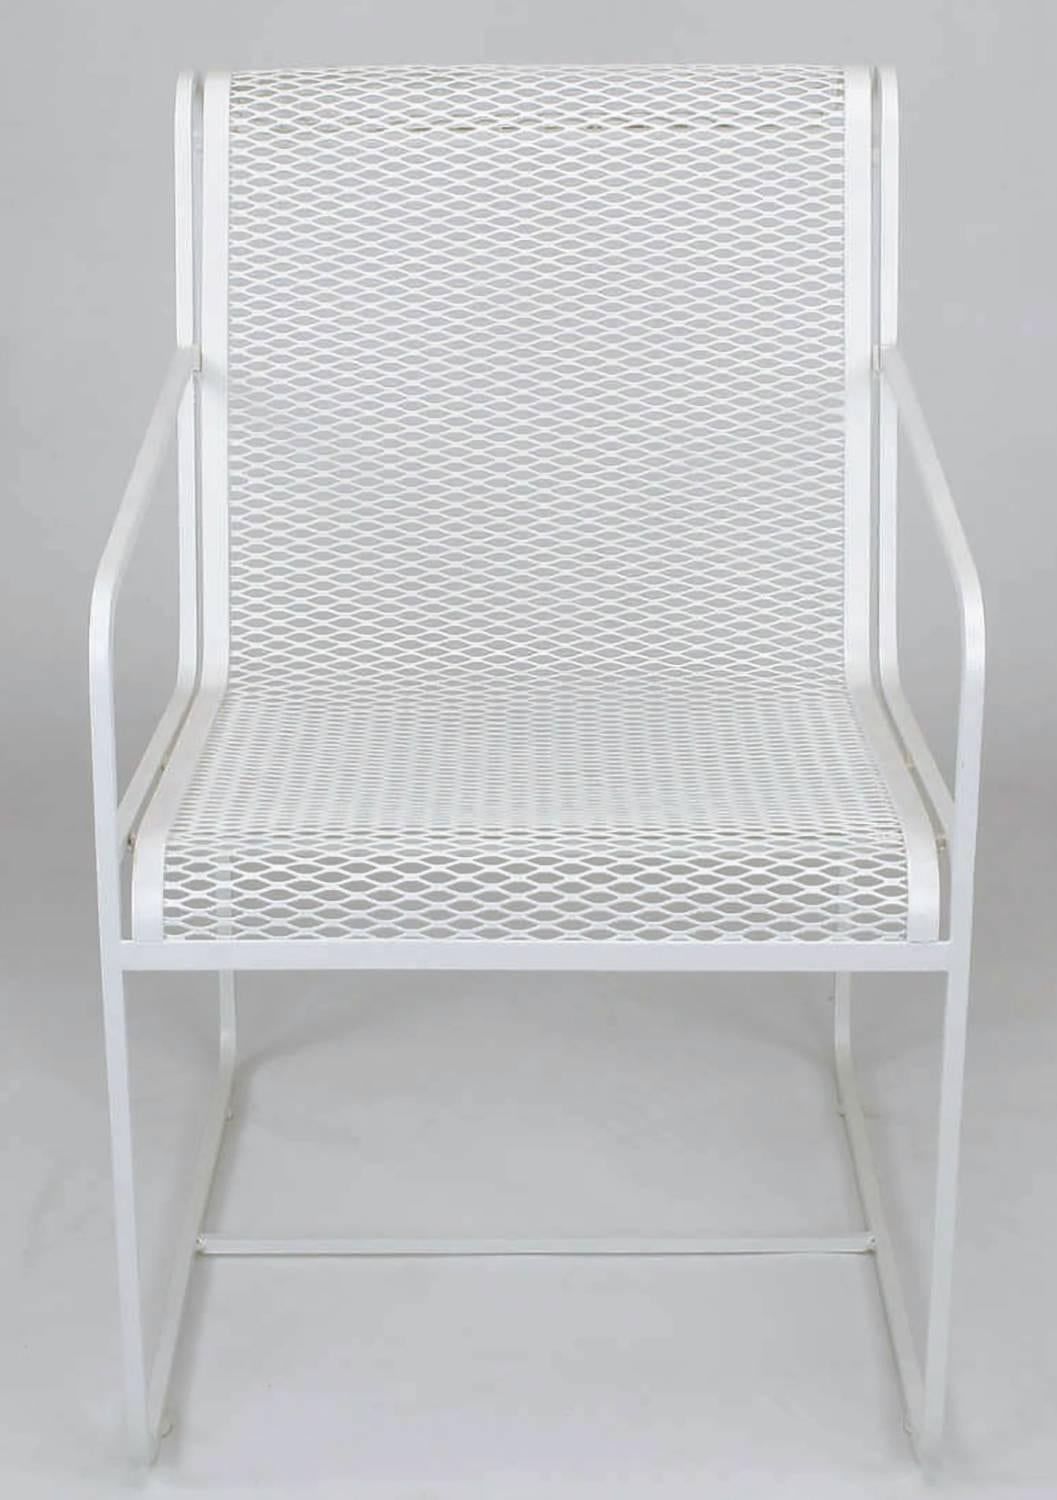 Rare set of four Maurizio Tempestini for Salterini white lacquer over wrought iron framed and iron mesh outdoor dining chairs. Minimalist design with open arms and linear form, iron mesh seat and back flow seamlessly.